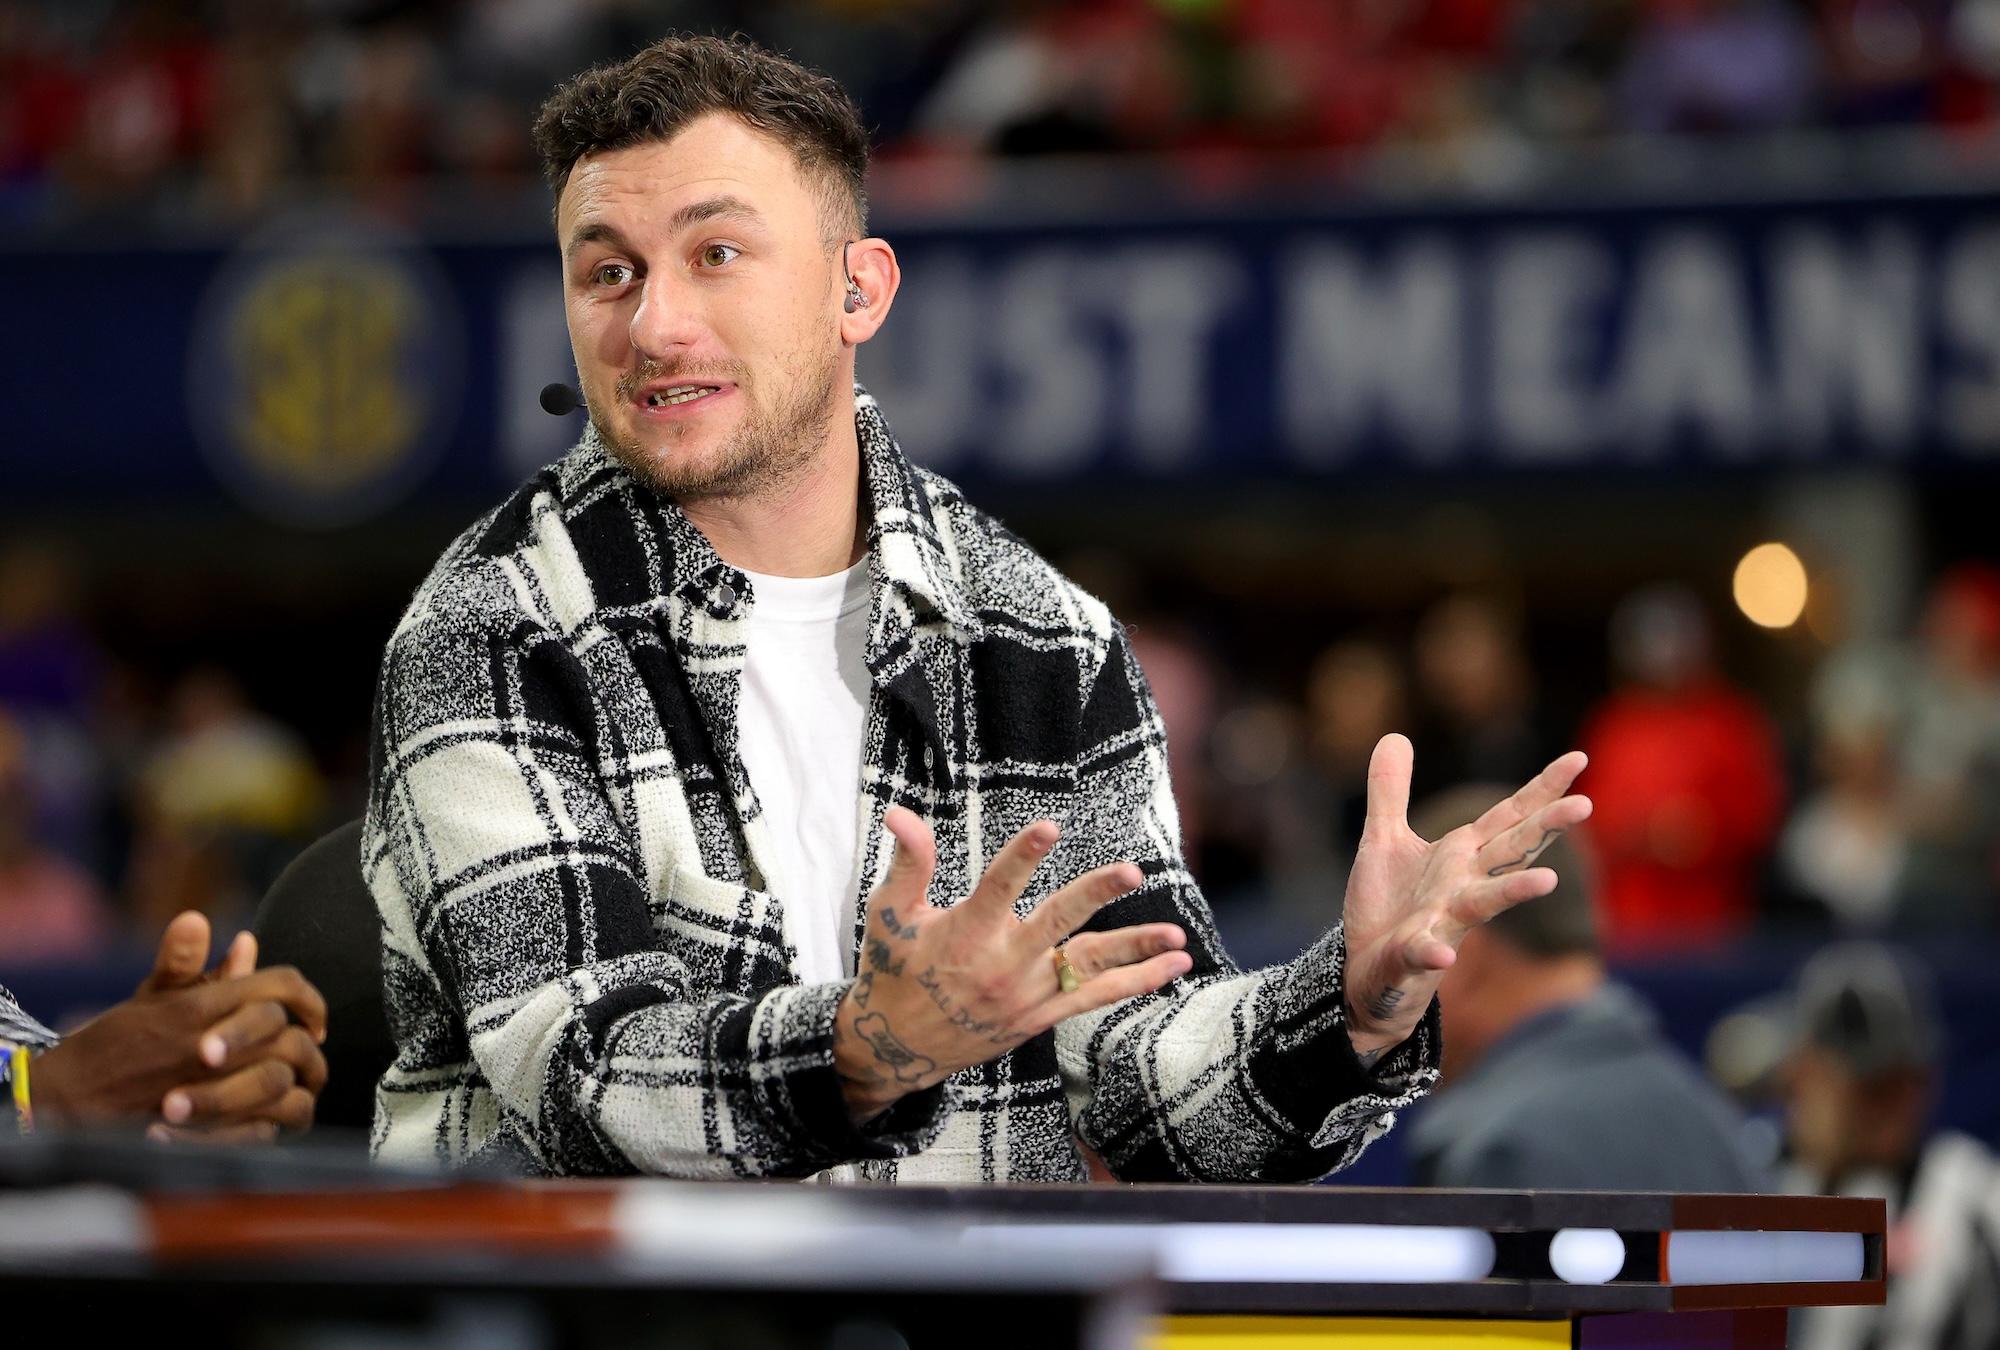 Johnny Manziel at the SEC Championship game between the LSU Tigers and the Georgia Bulldogs at Mercedes-Benz Stadium on December 03, 2022 in Atlanta, Georgia.